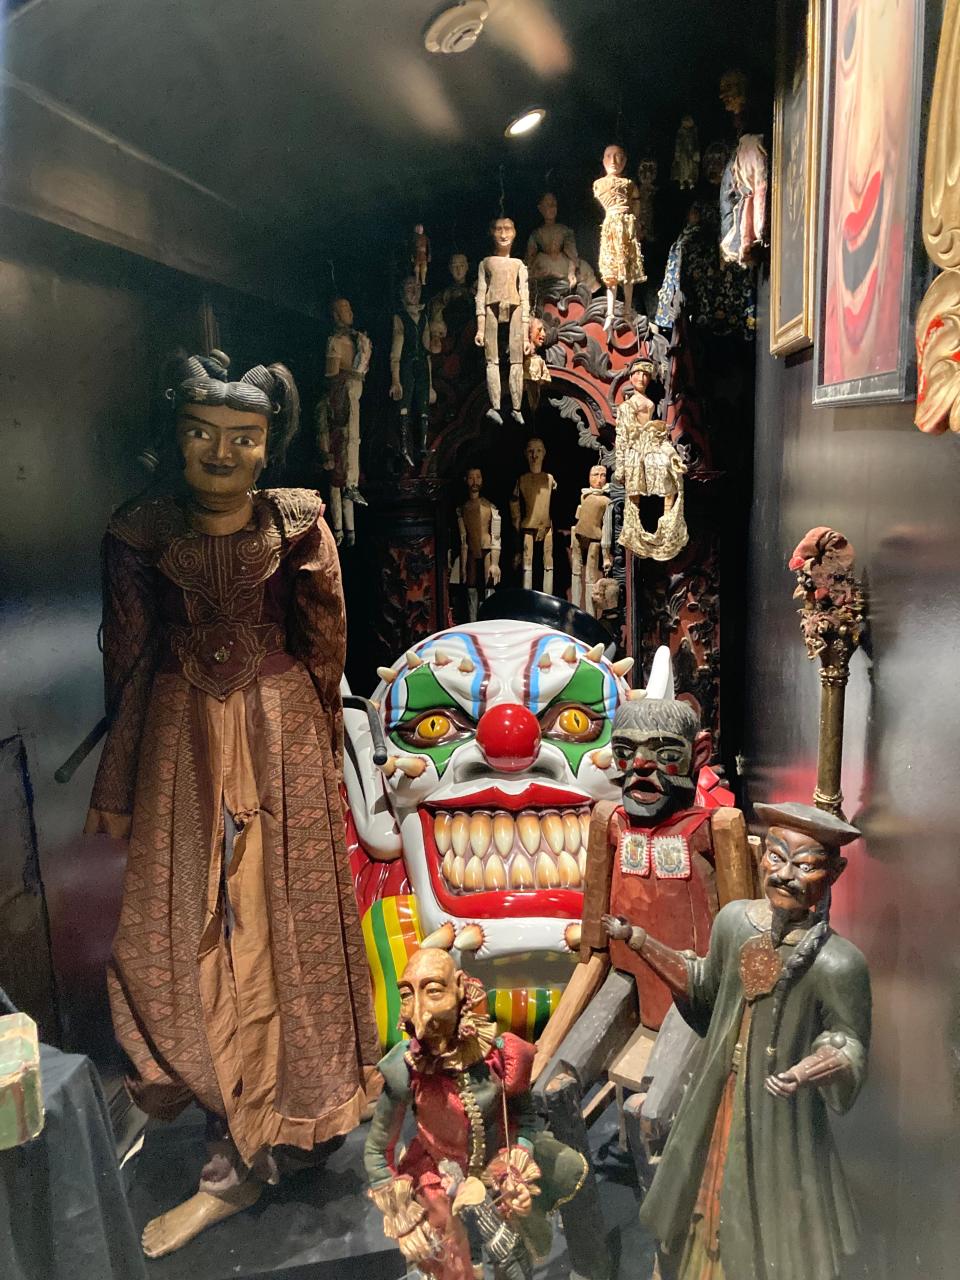 The haunted doll collection at the Vampire Art Museum and Paranormal Activity attraction in Buckingham. Owner Edmondo Crimi acquired another doll whose owner wanted to get rid of it he was willing to pay Crimi $200 to take it away.